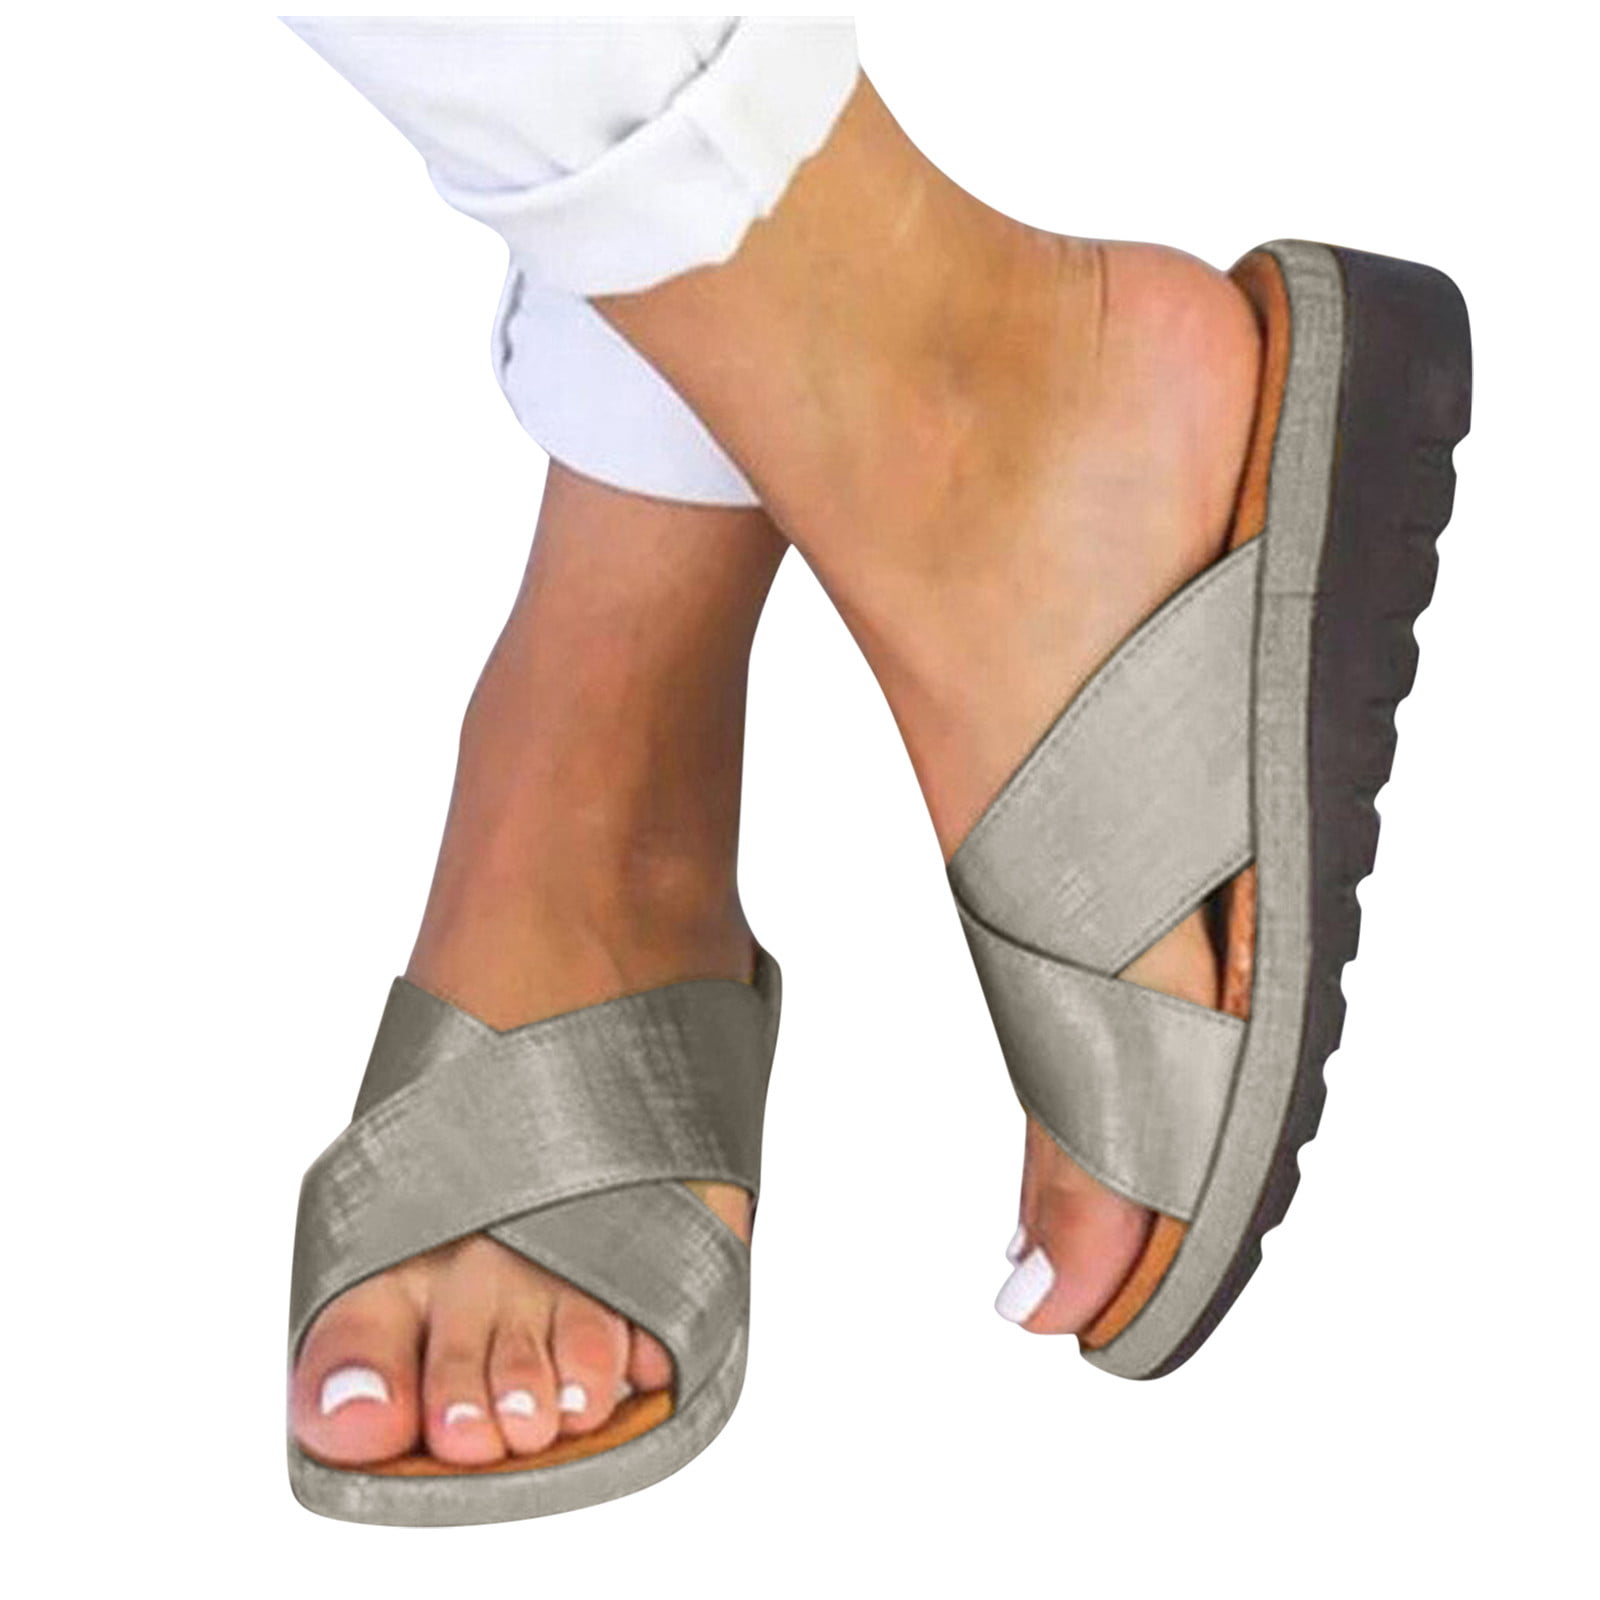 Vedolay Platform Shoes Women's Comfy Sandals Ultra-Comfy Breathable Wedge  Peep Toe Dotmalls Sandals,Gray 10 